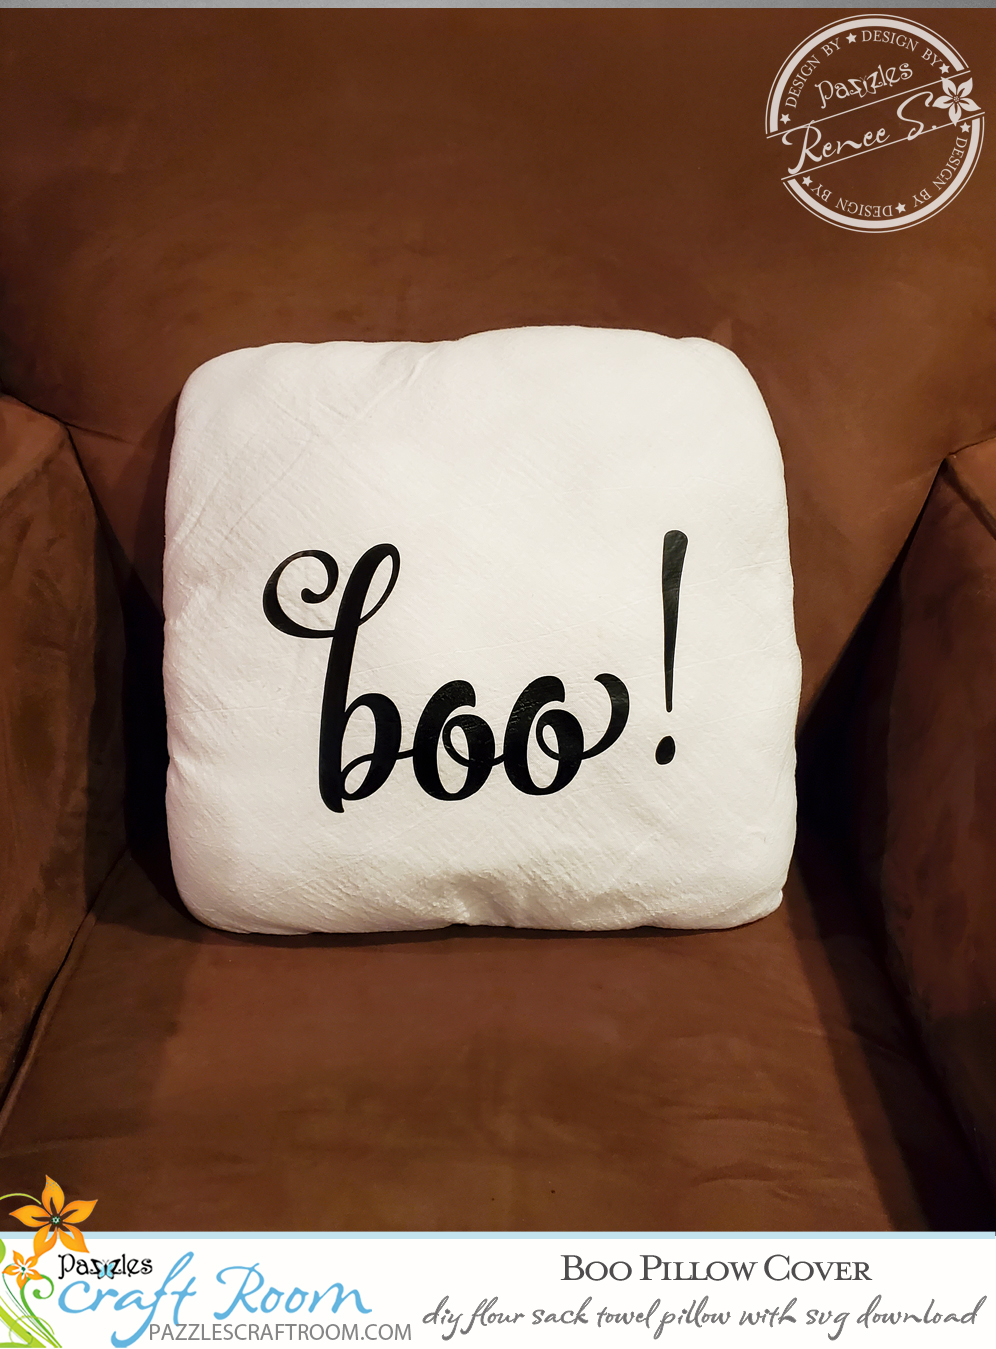 Pazzles DIY Boo Flour Sack Towel Pillow Cover with instant SVG download. Compatible with all major electronic cutters including Pazzles Inspiration, Cricut, and Silhouette Cameo. Design by Renee Smart.